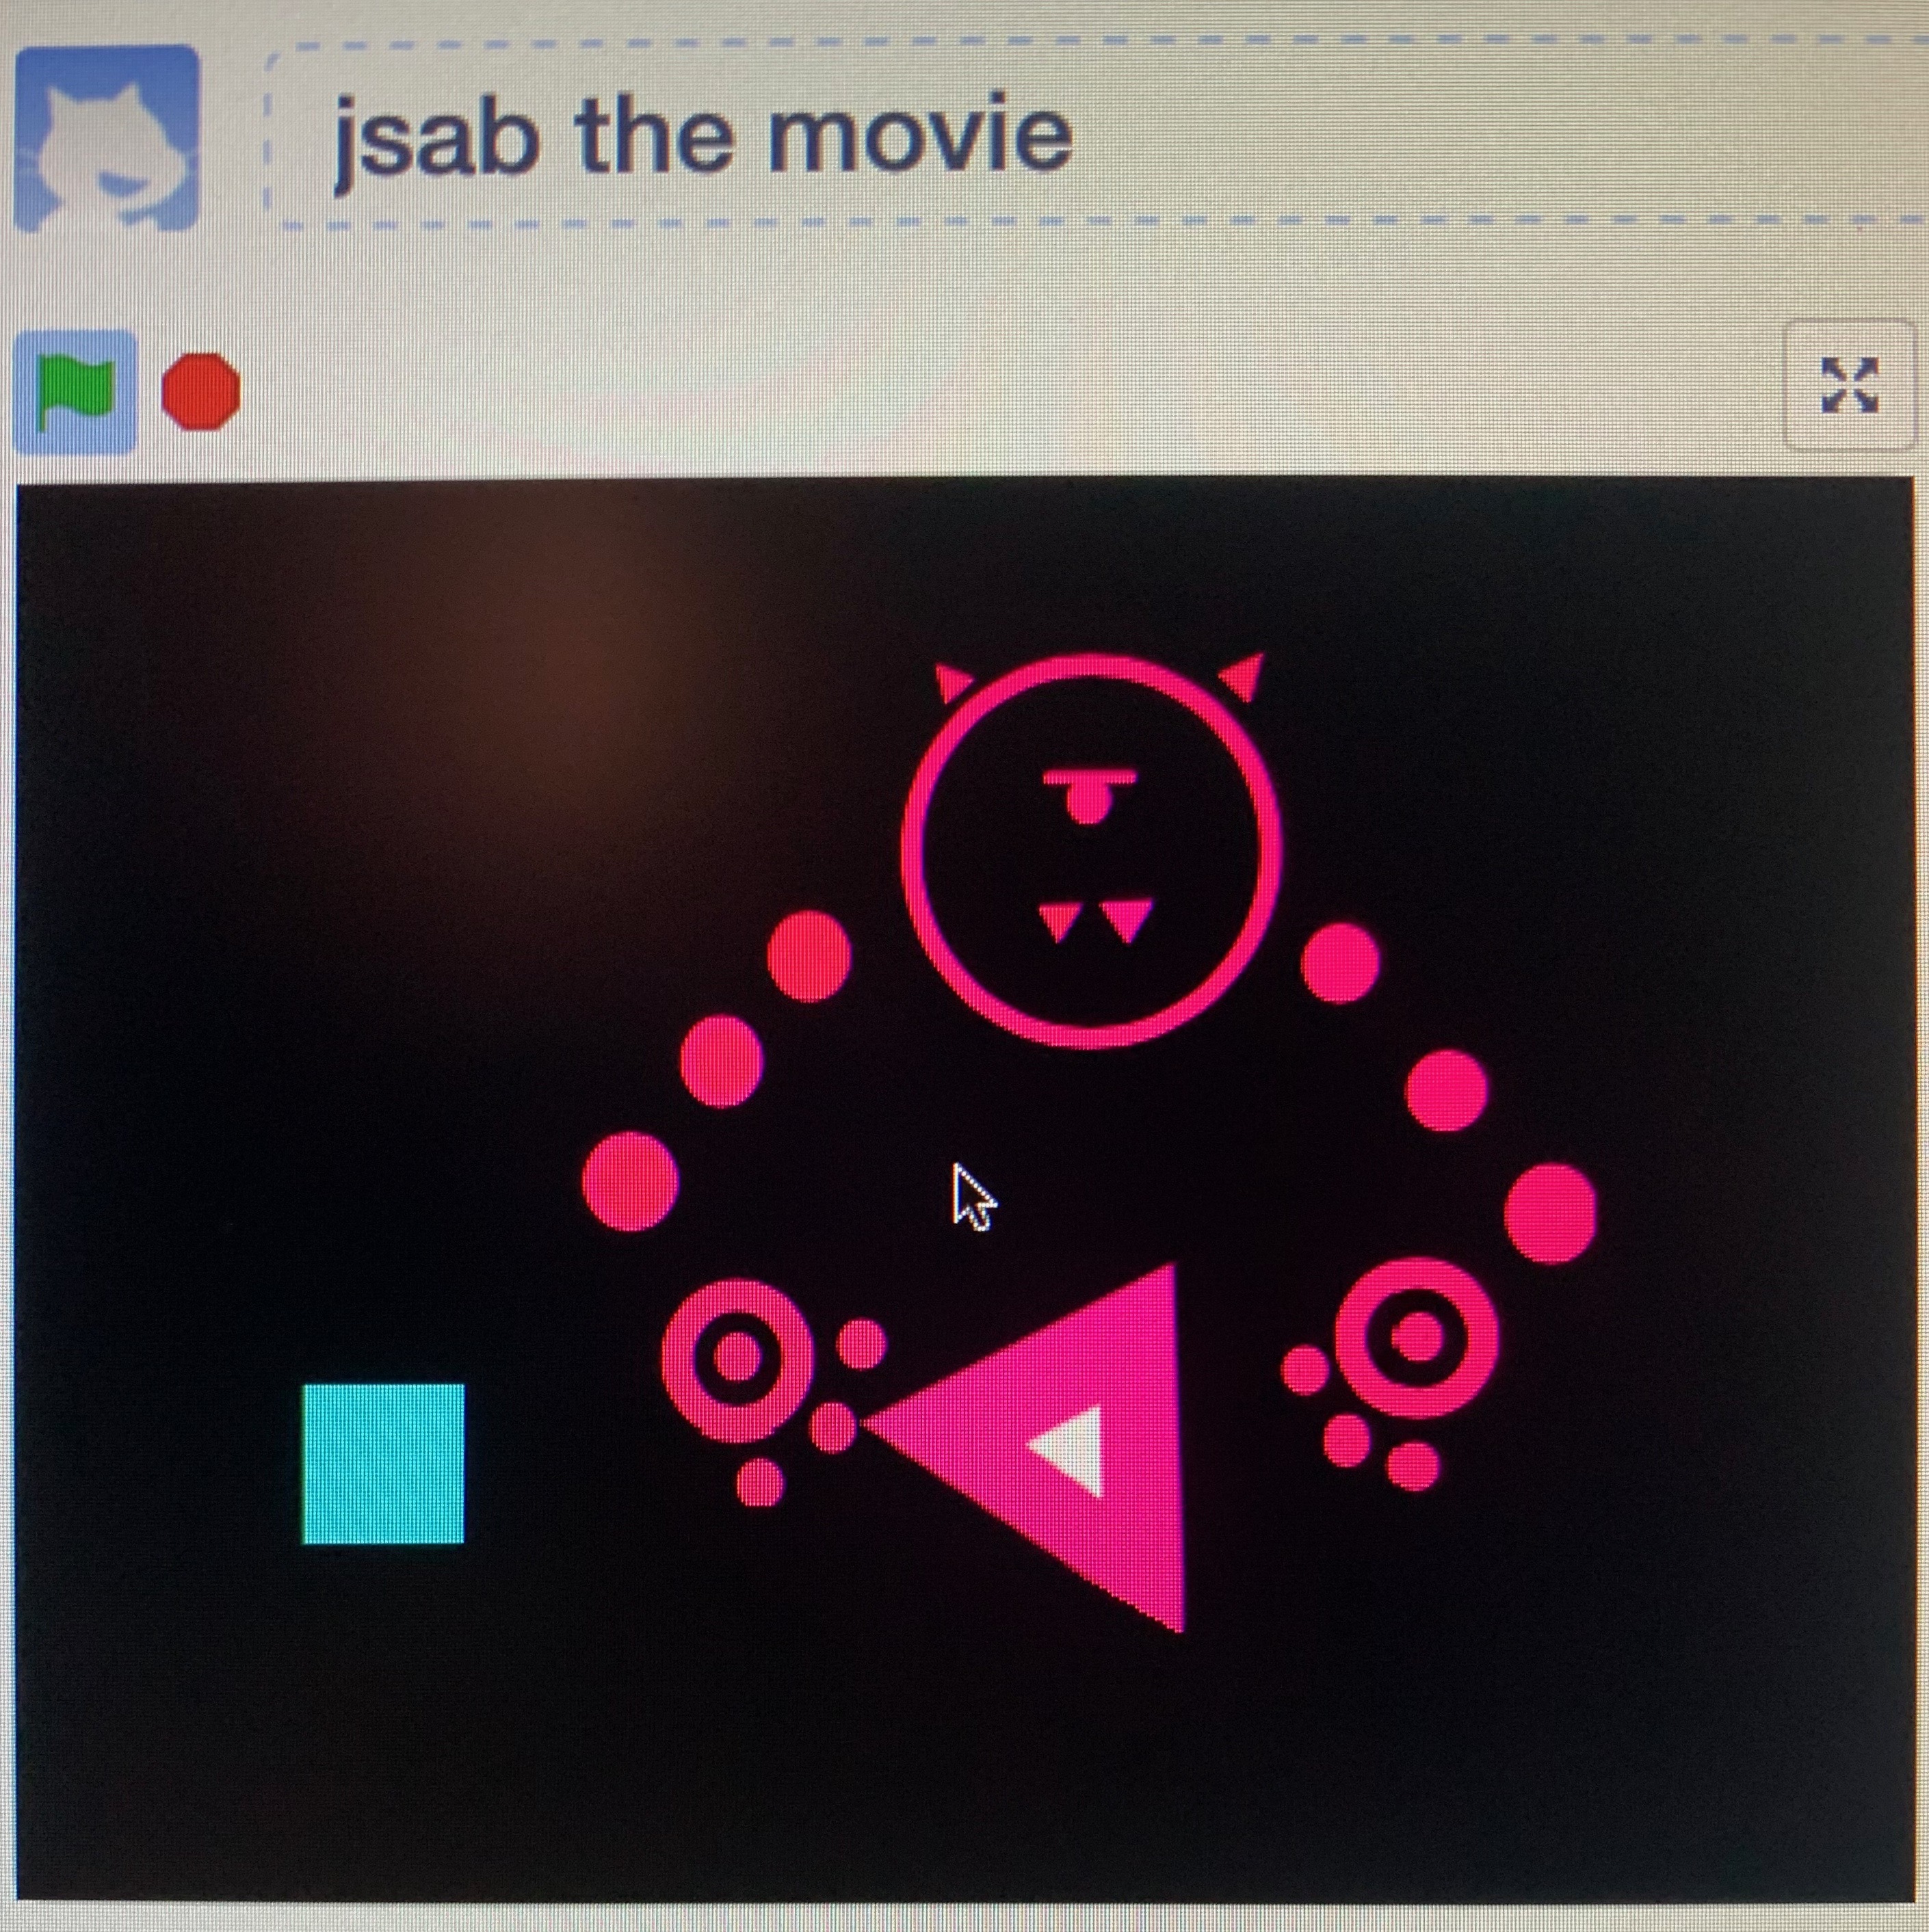 JSAB-The Movie (Class Project 2)